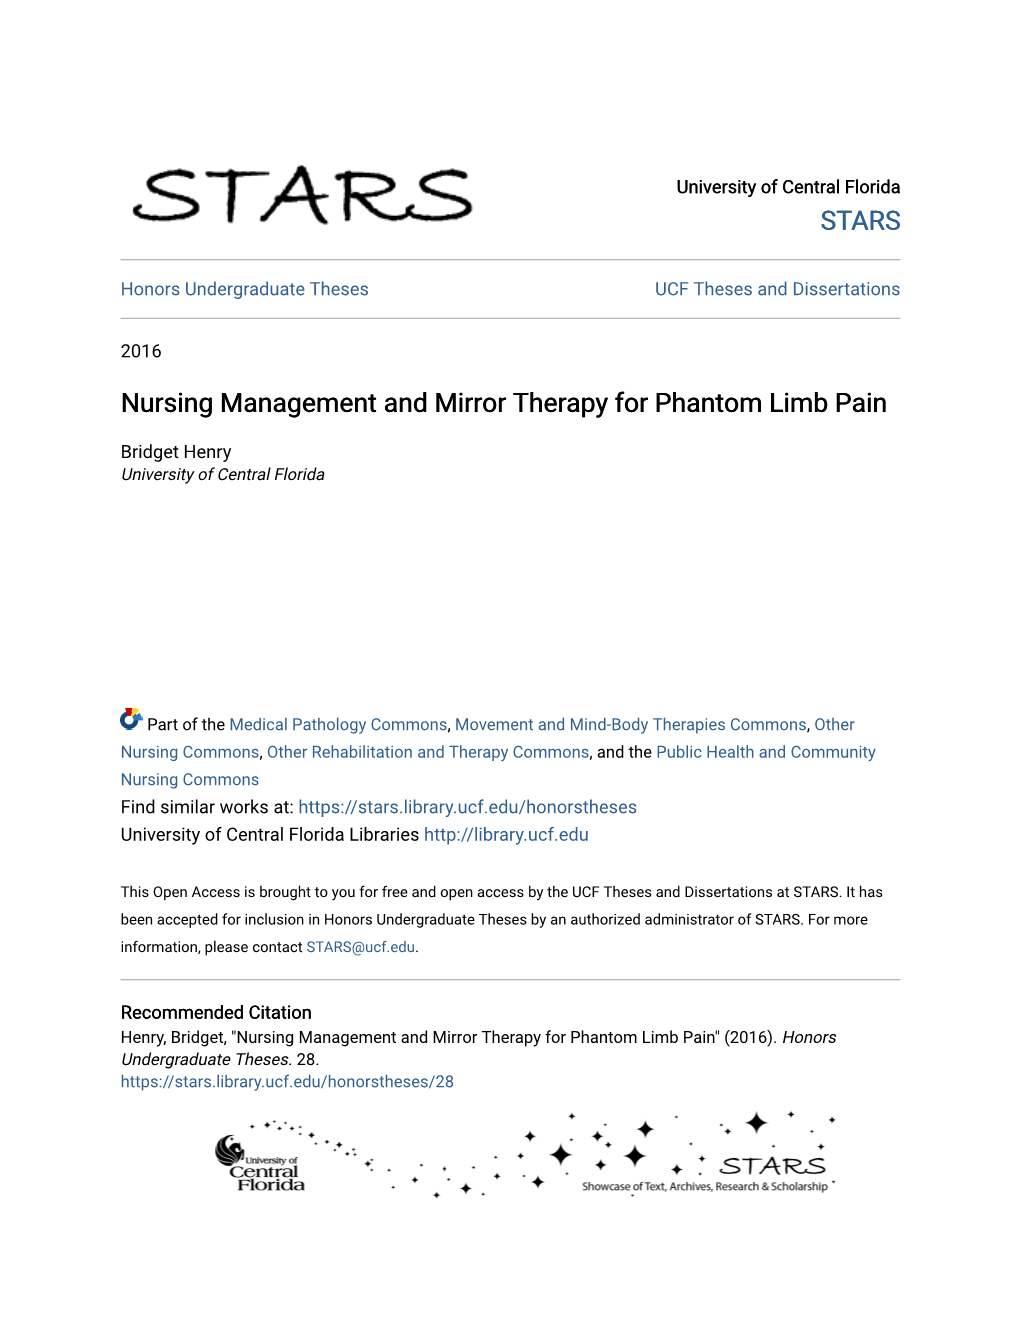 Nursing Management and Mirror Therapy for Phantom Limb Pain